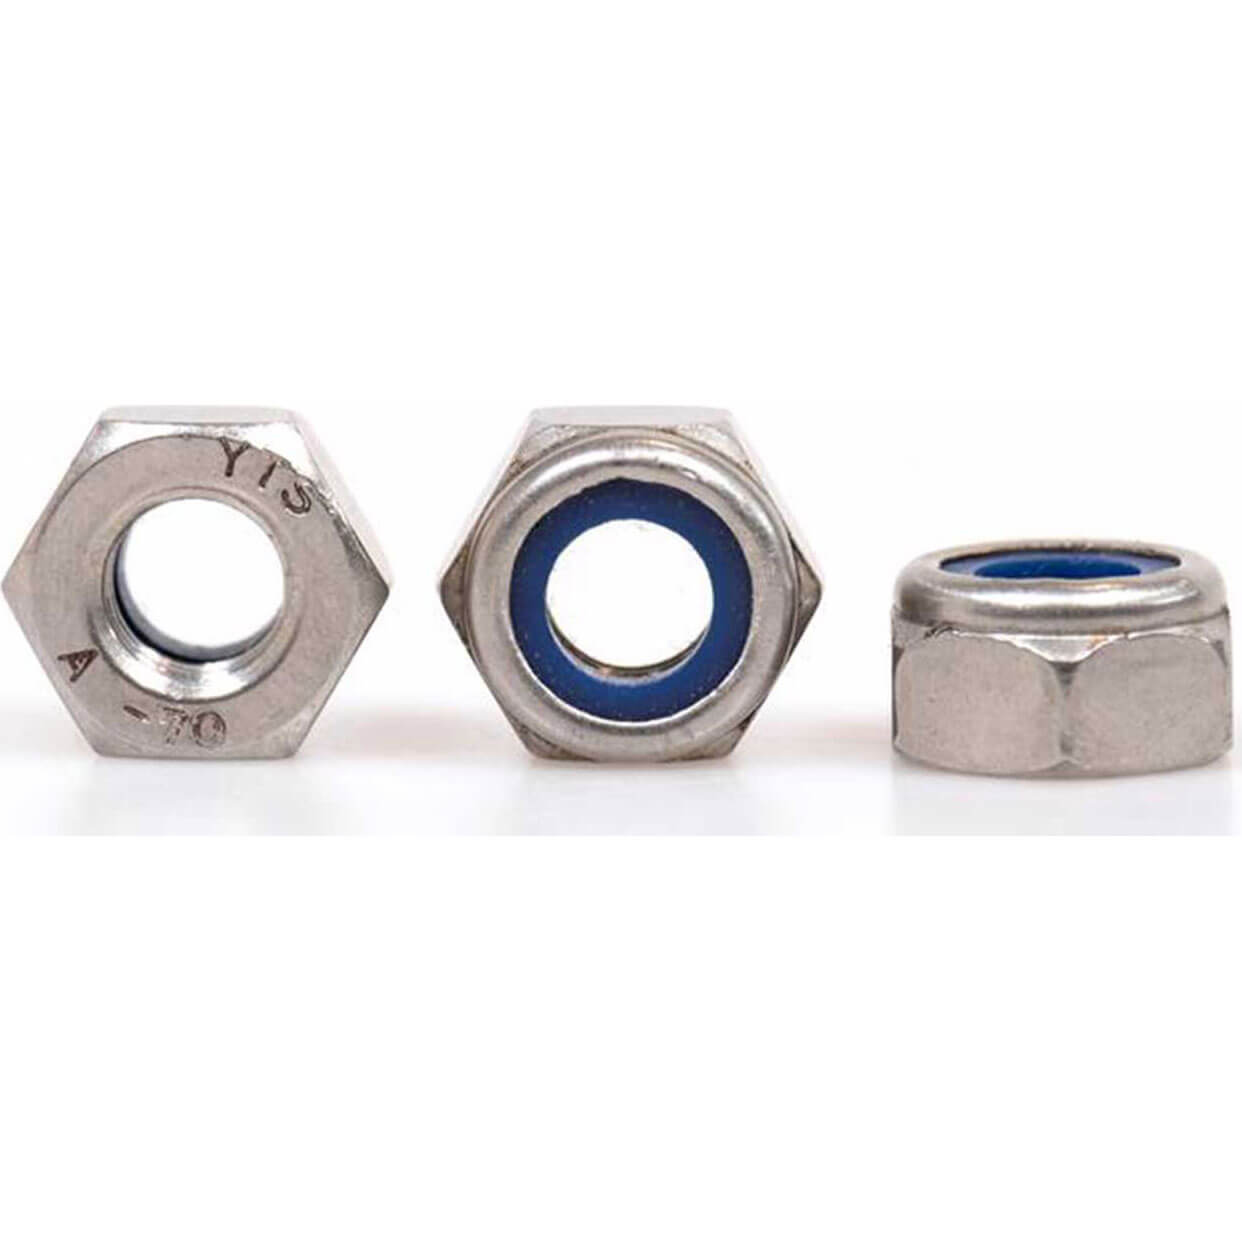 Image of Sirius A4 316 Stainless Steel Nyloc Nuts M10